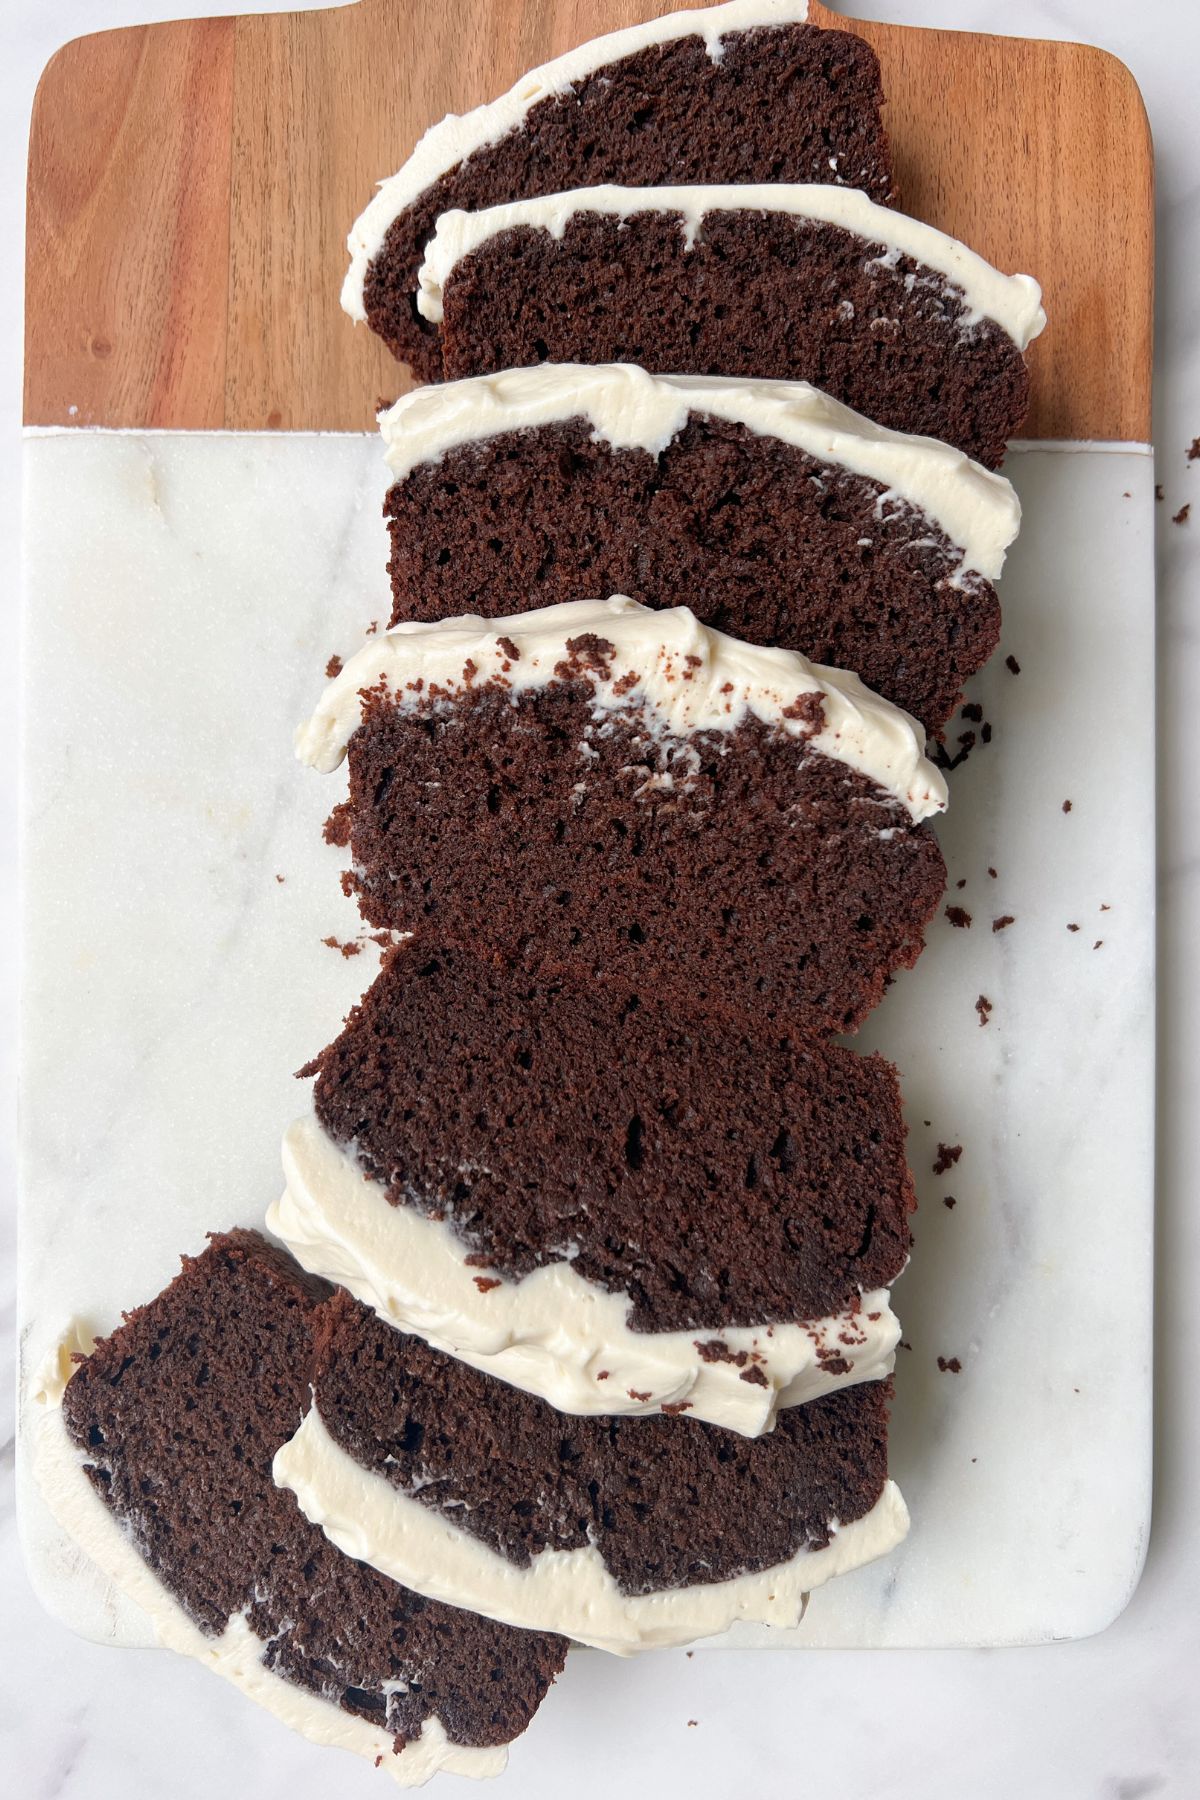 Slices of mini chocolate cake with cream cheese frosting.